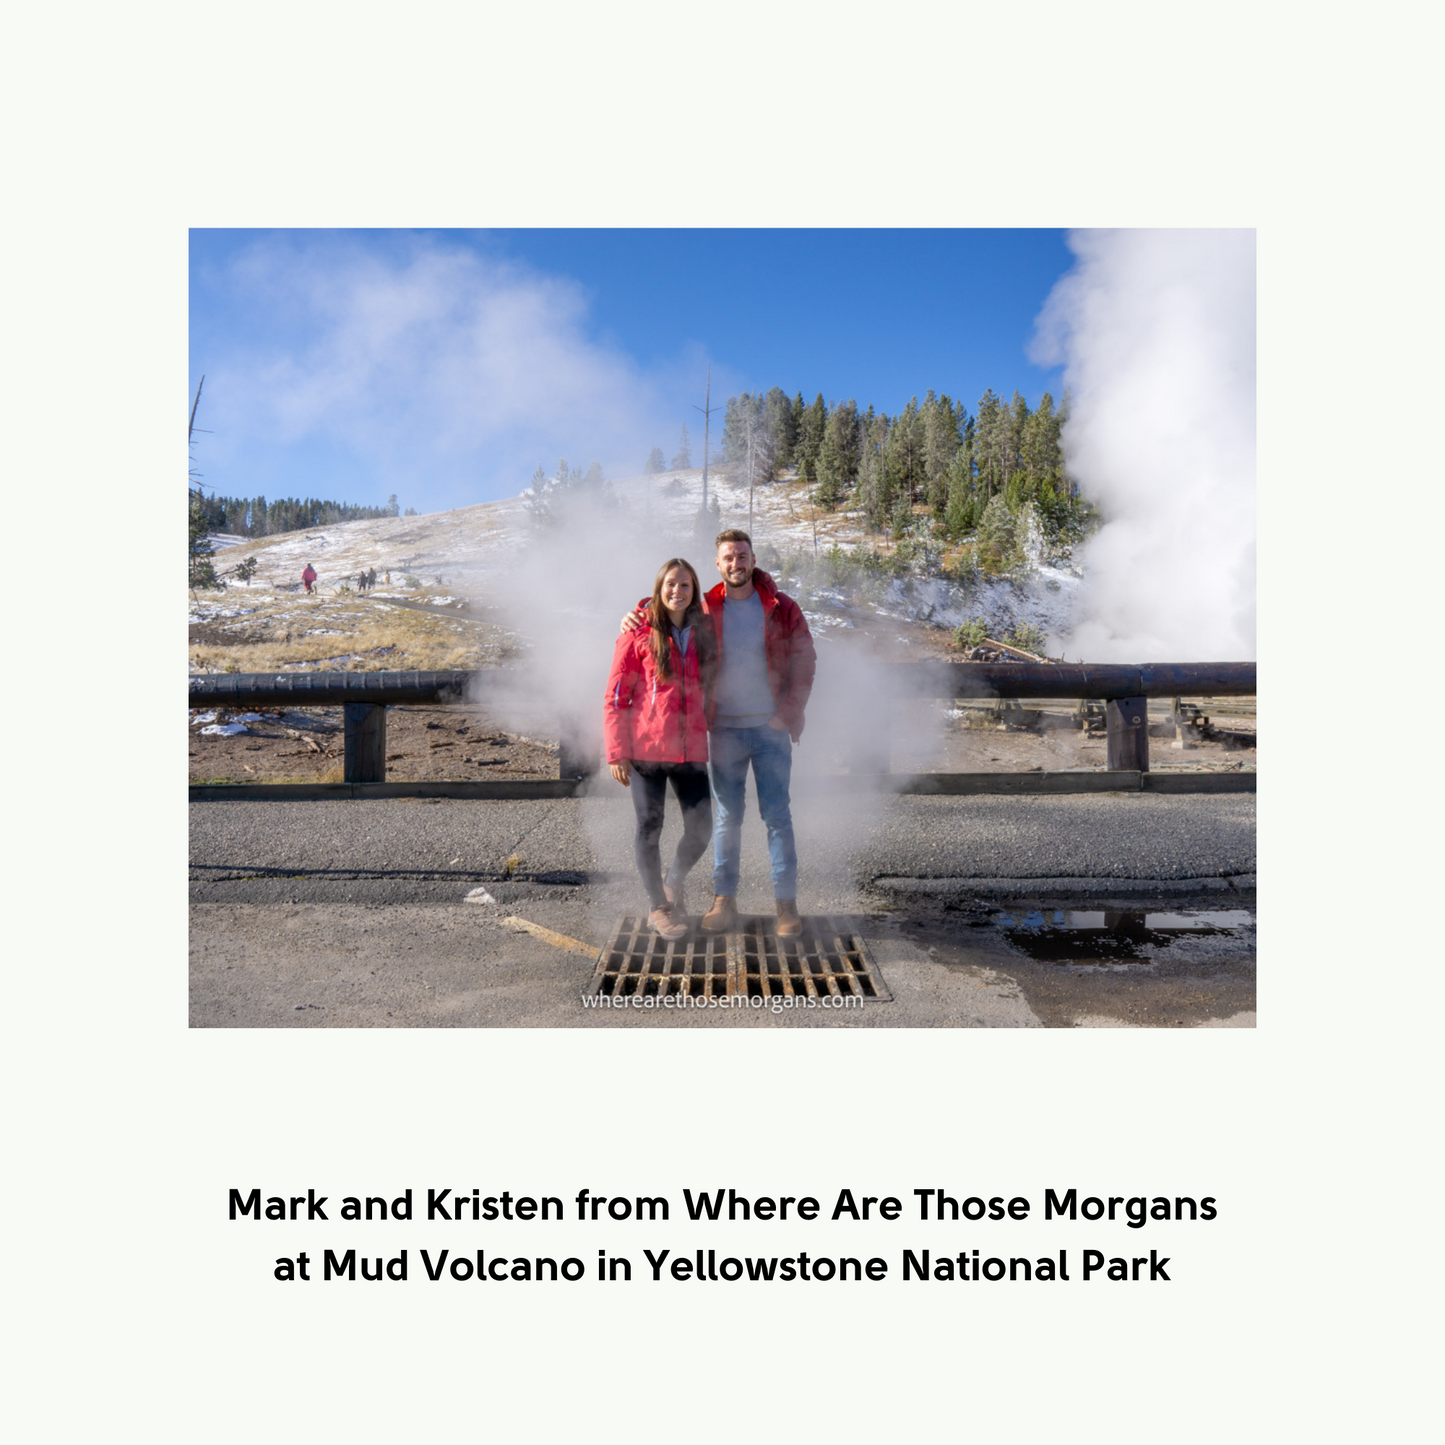 Yellowstone National Park Travel Guidebook